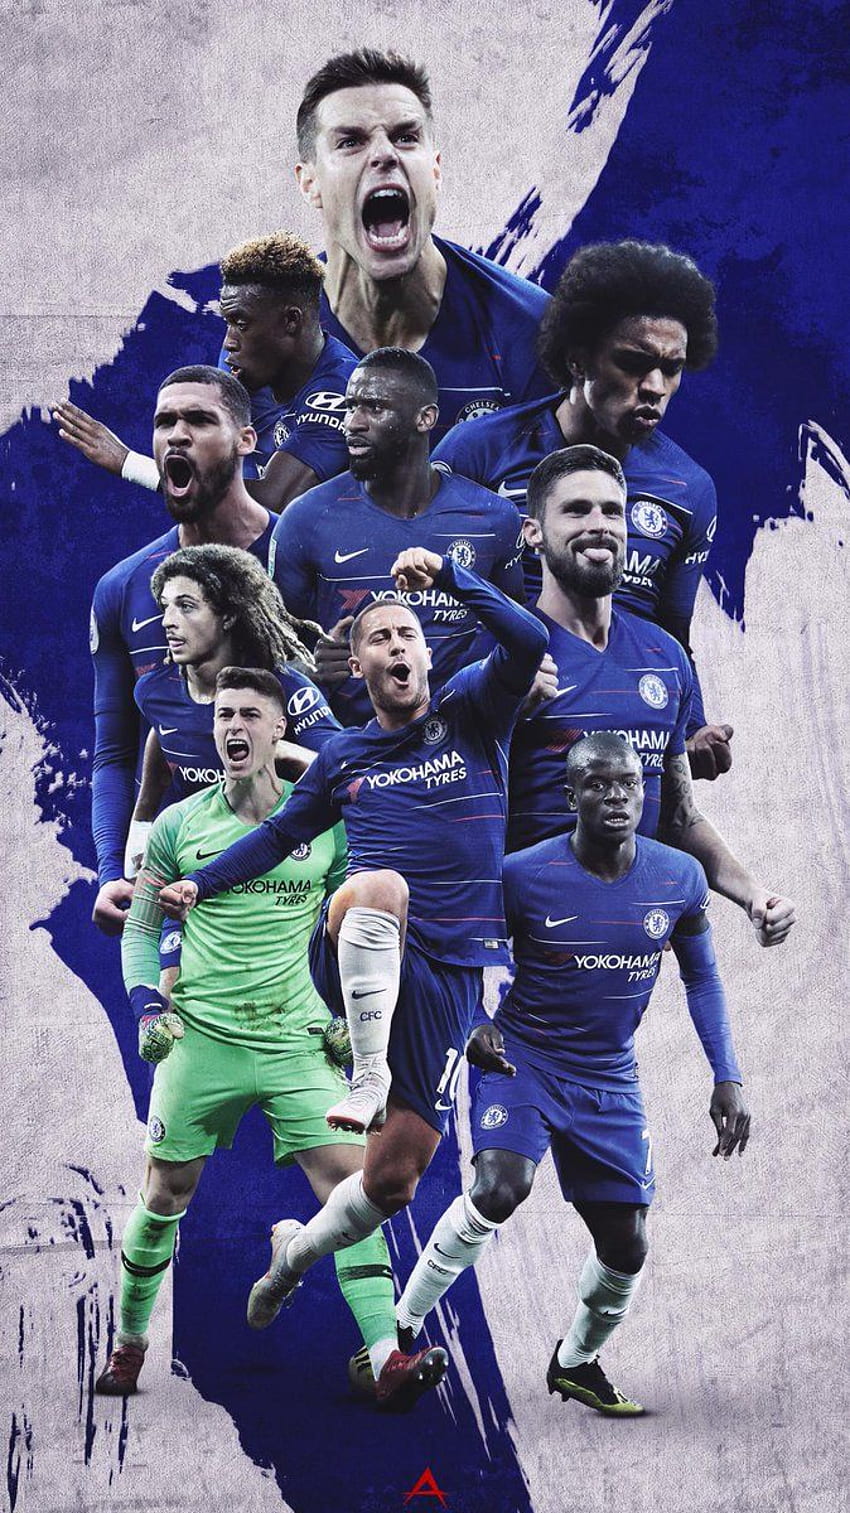 Any good looking Chelsea wallpapers for iPhone? : r/chelseafc